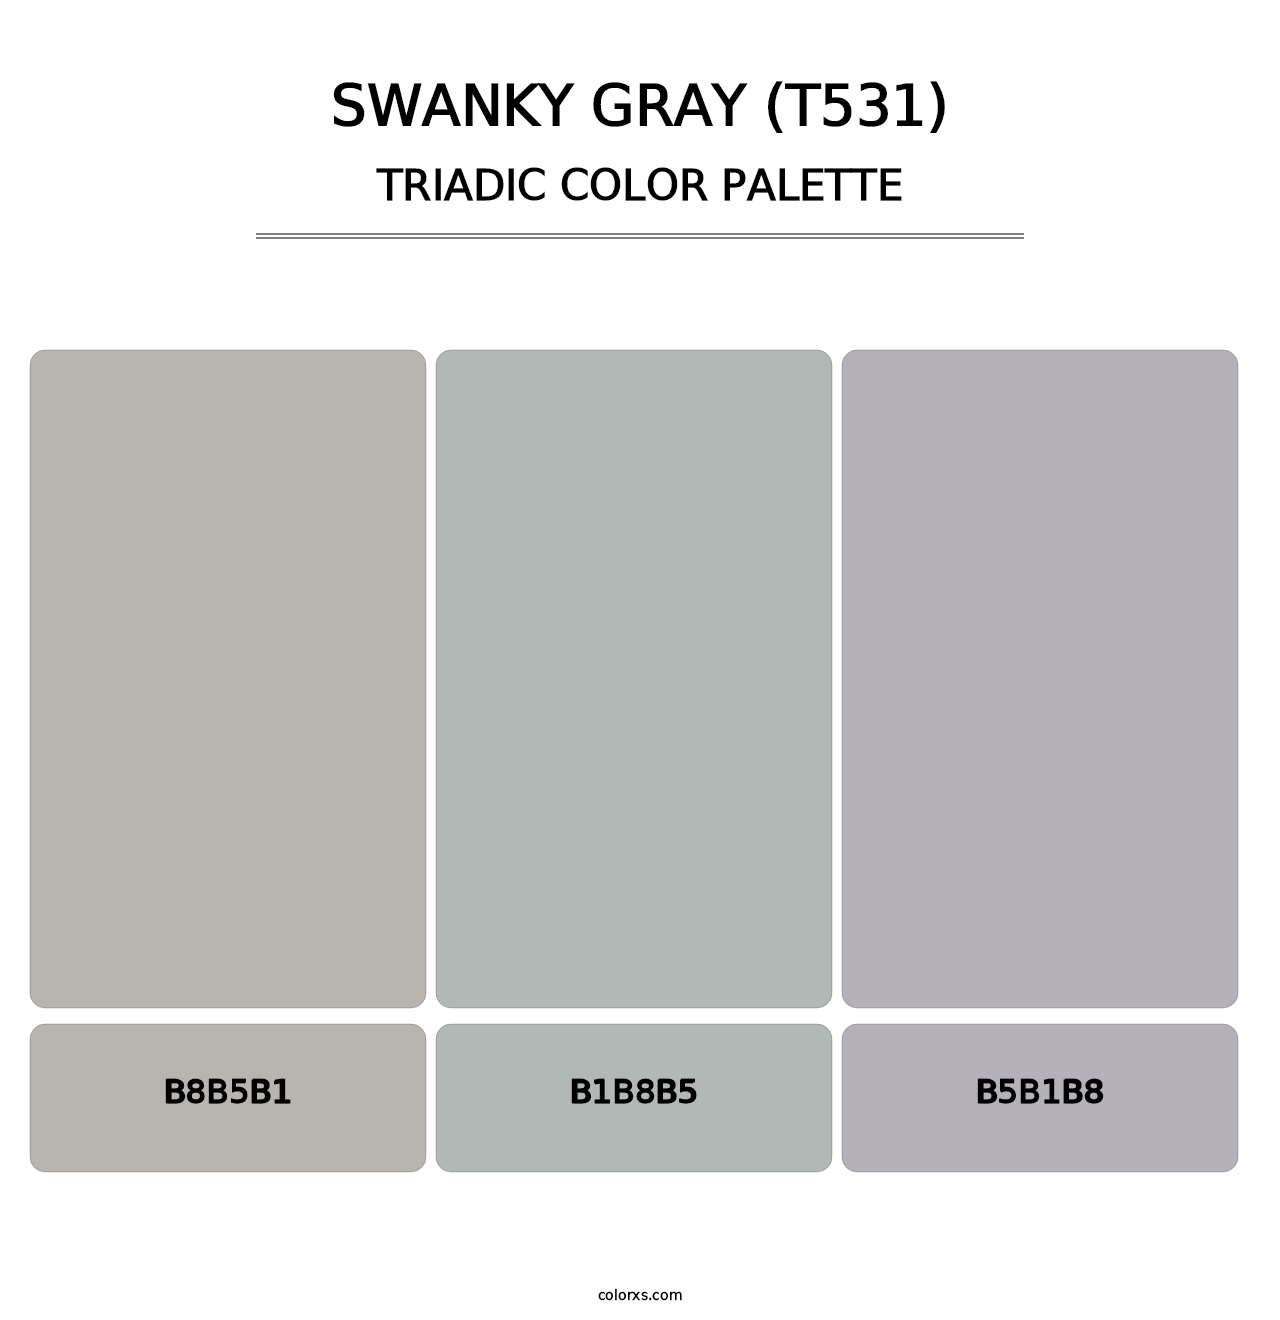 Swanky Gray (T531) - Triadic Color Palette